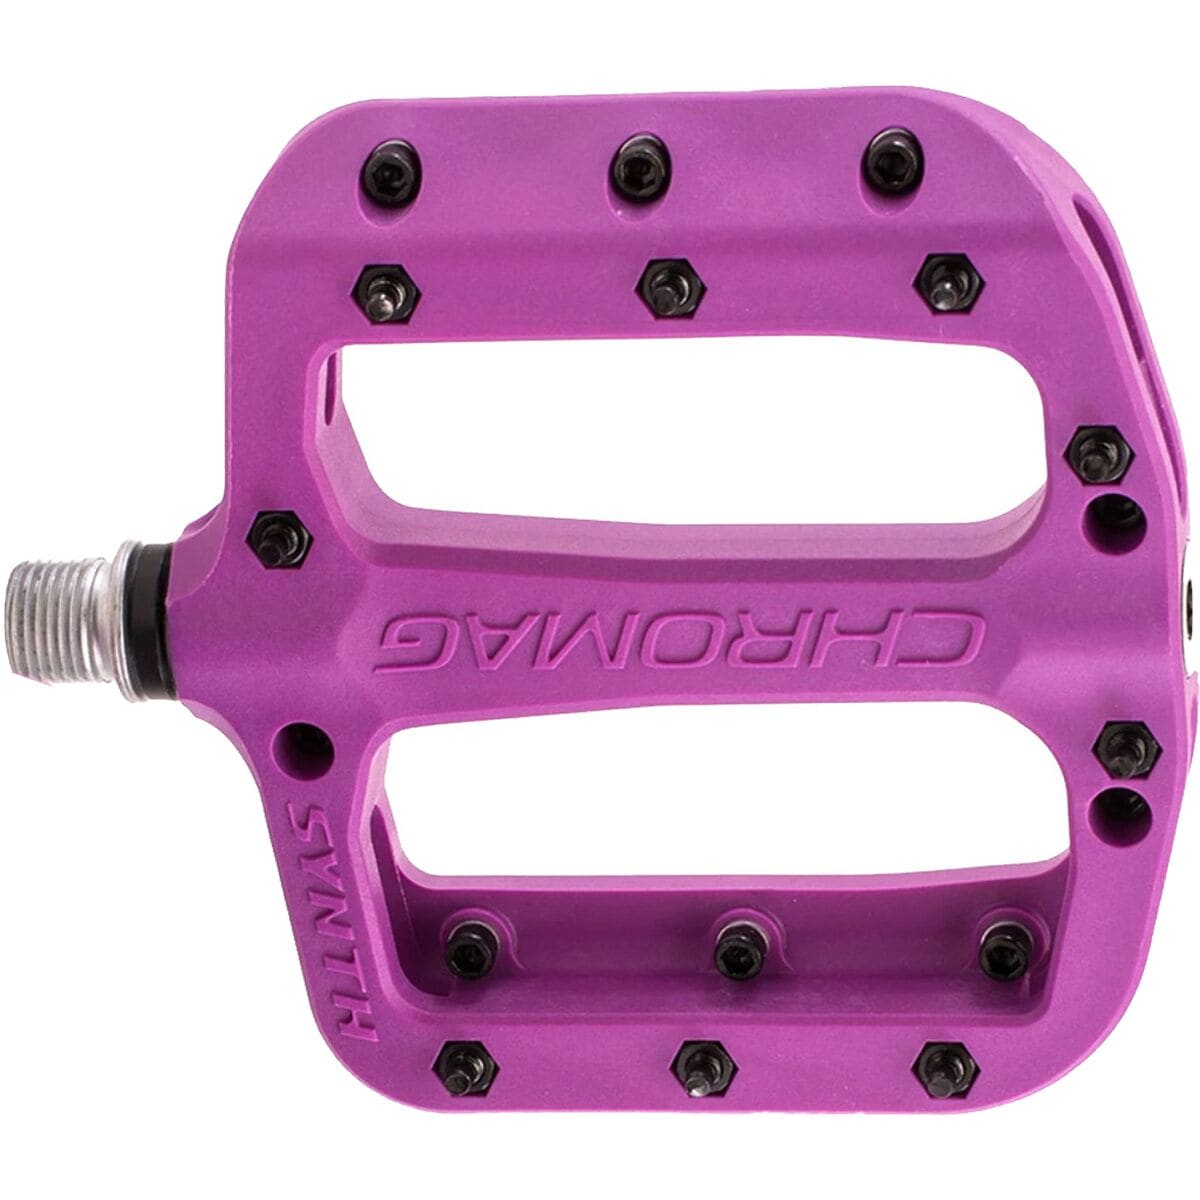 Chromag Synth Pedals Purple, Pair